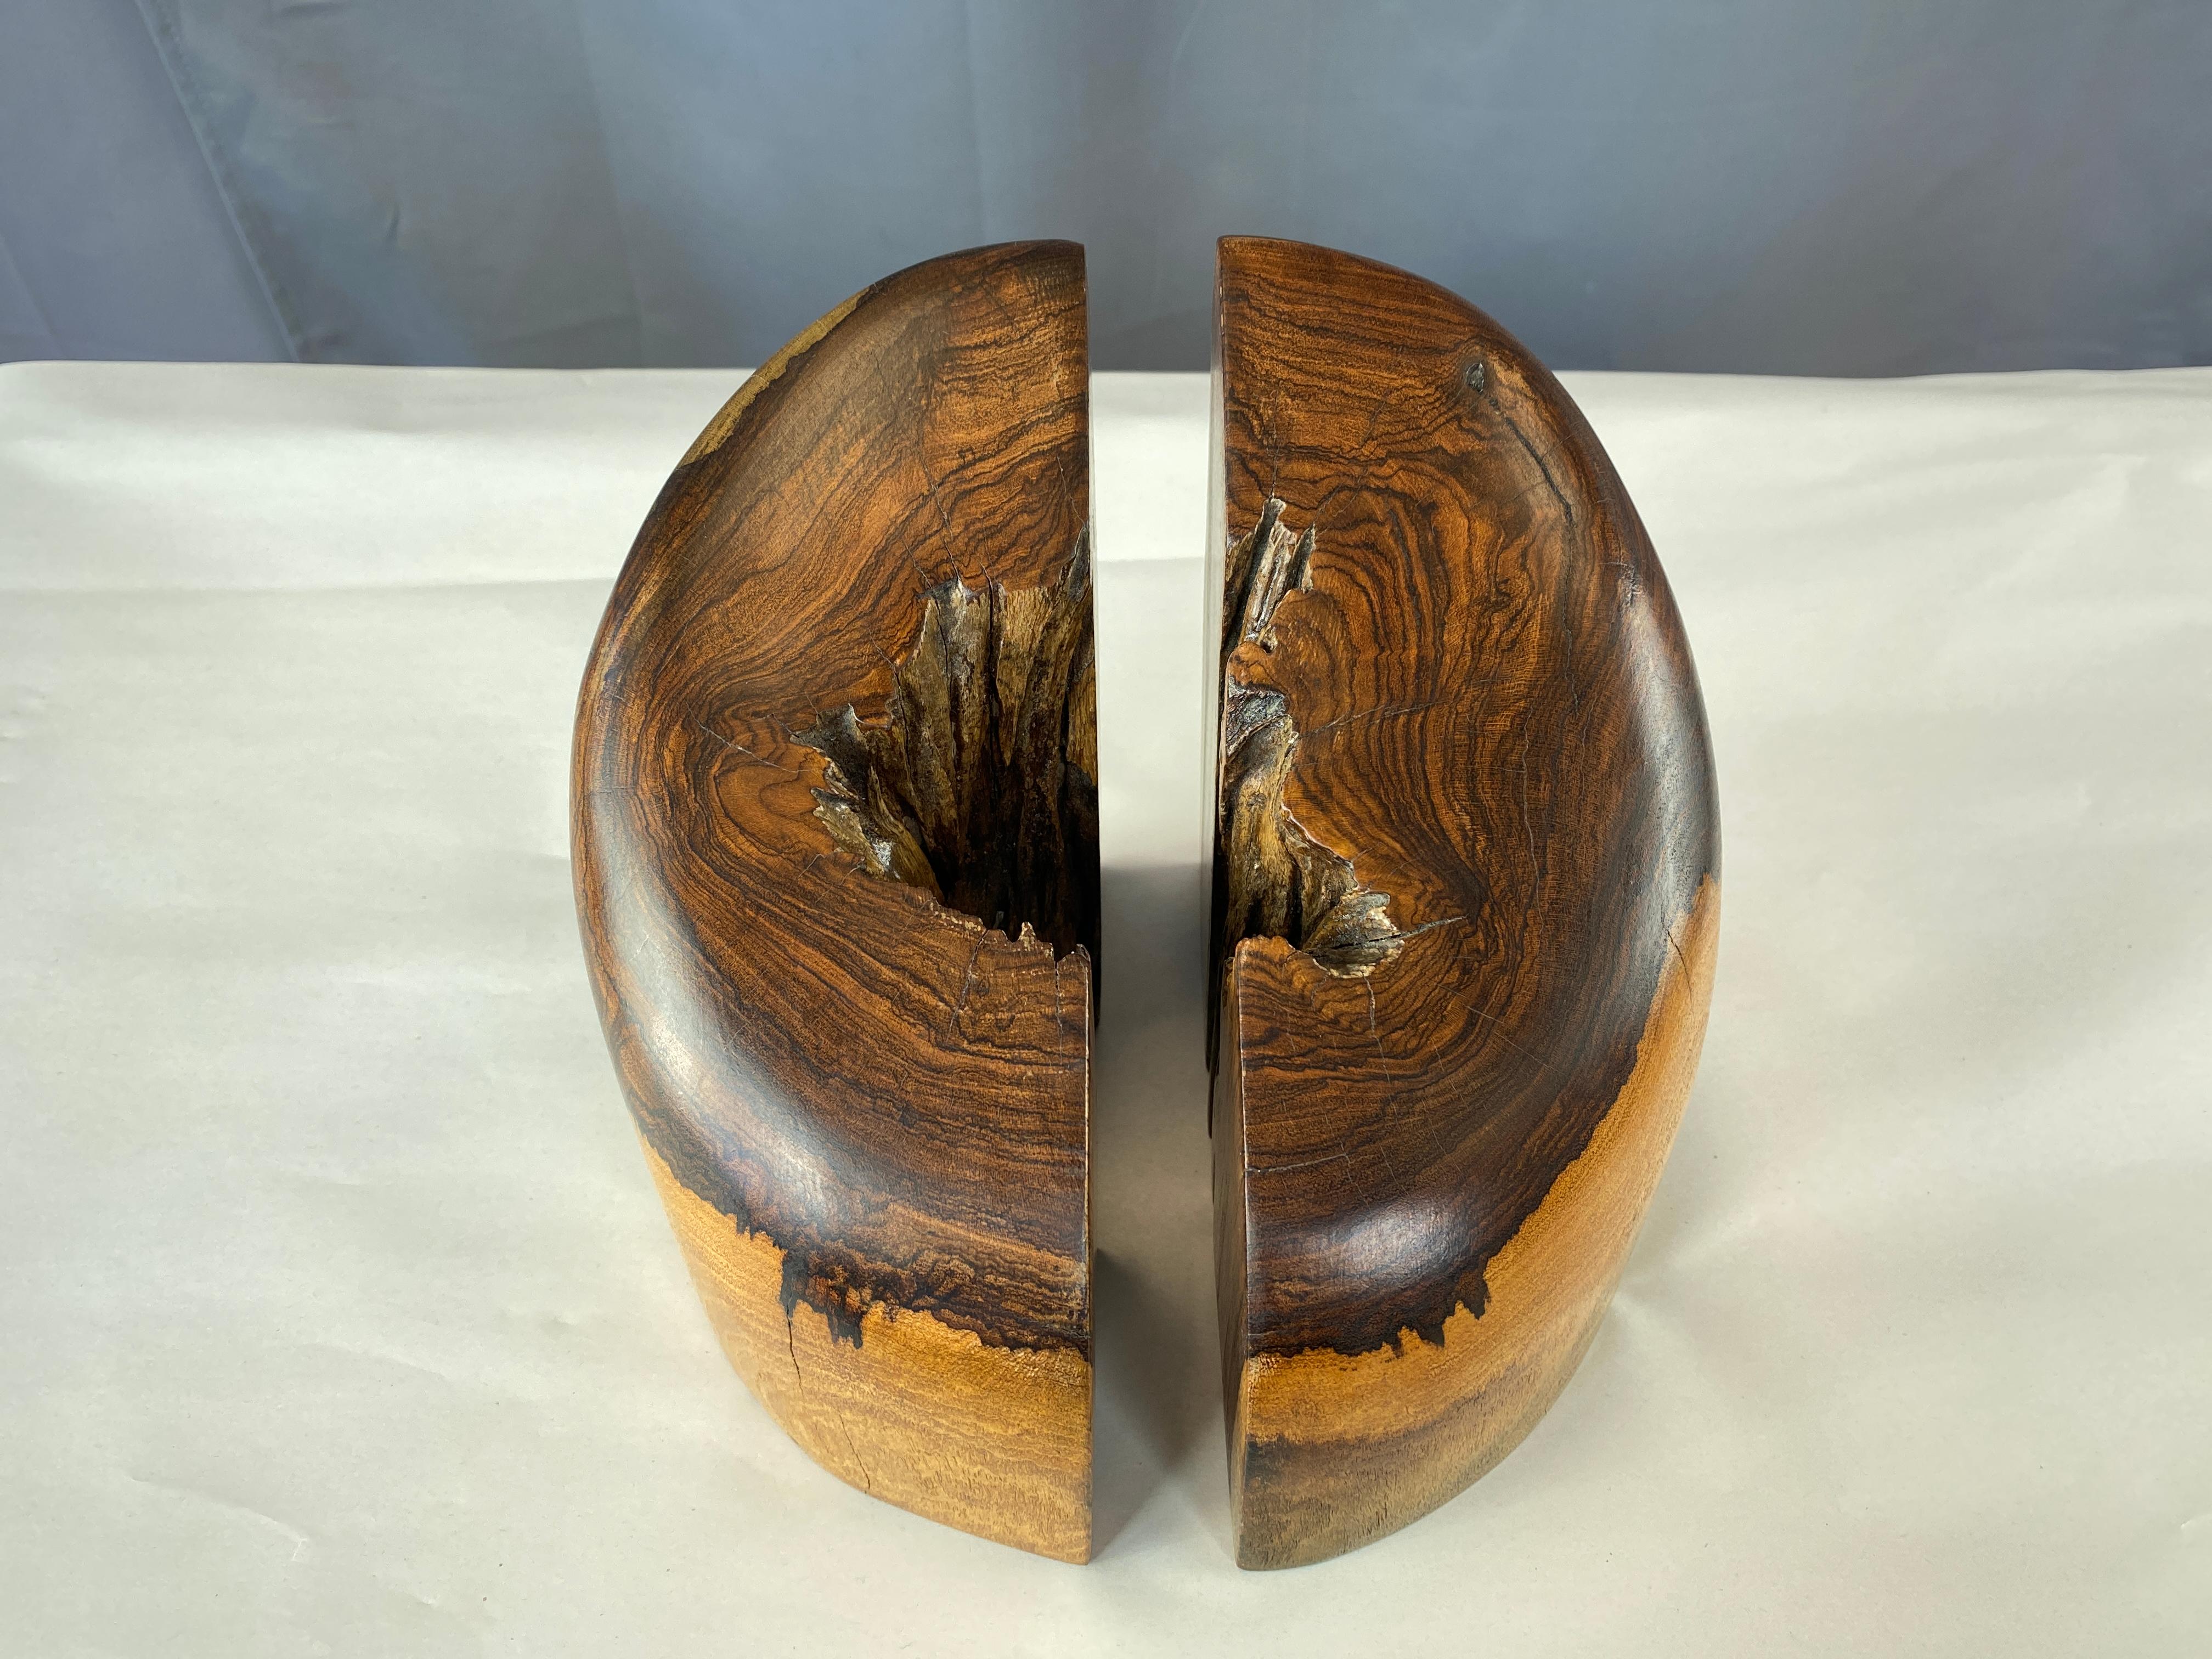 Offered here is a pair of solid Cocobolo wood bookends, designed by Don Shoemaker for Señal.
Cocobolo is a tropical hardwood from Central America, similar to Rosewood.

Left is 4 x 7.50 x 7.25 H Right is 3.75 x 7.50 x 7.25 H
Together below.